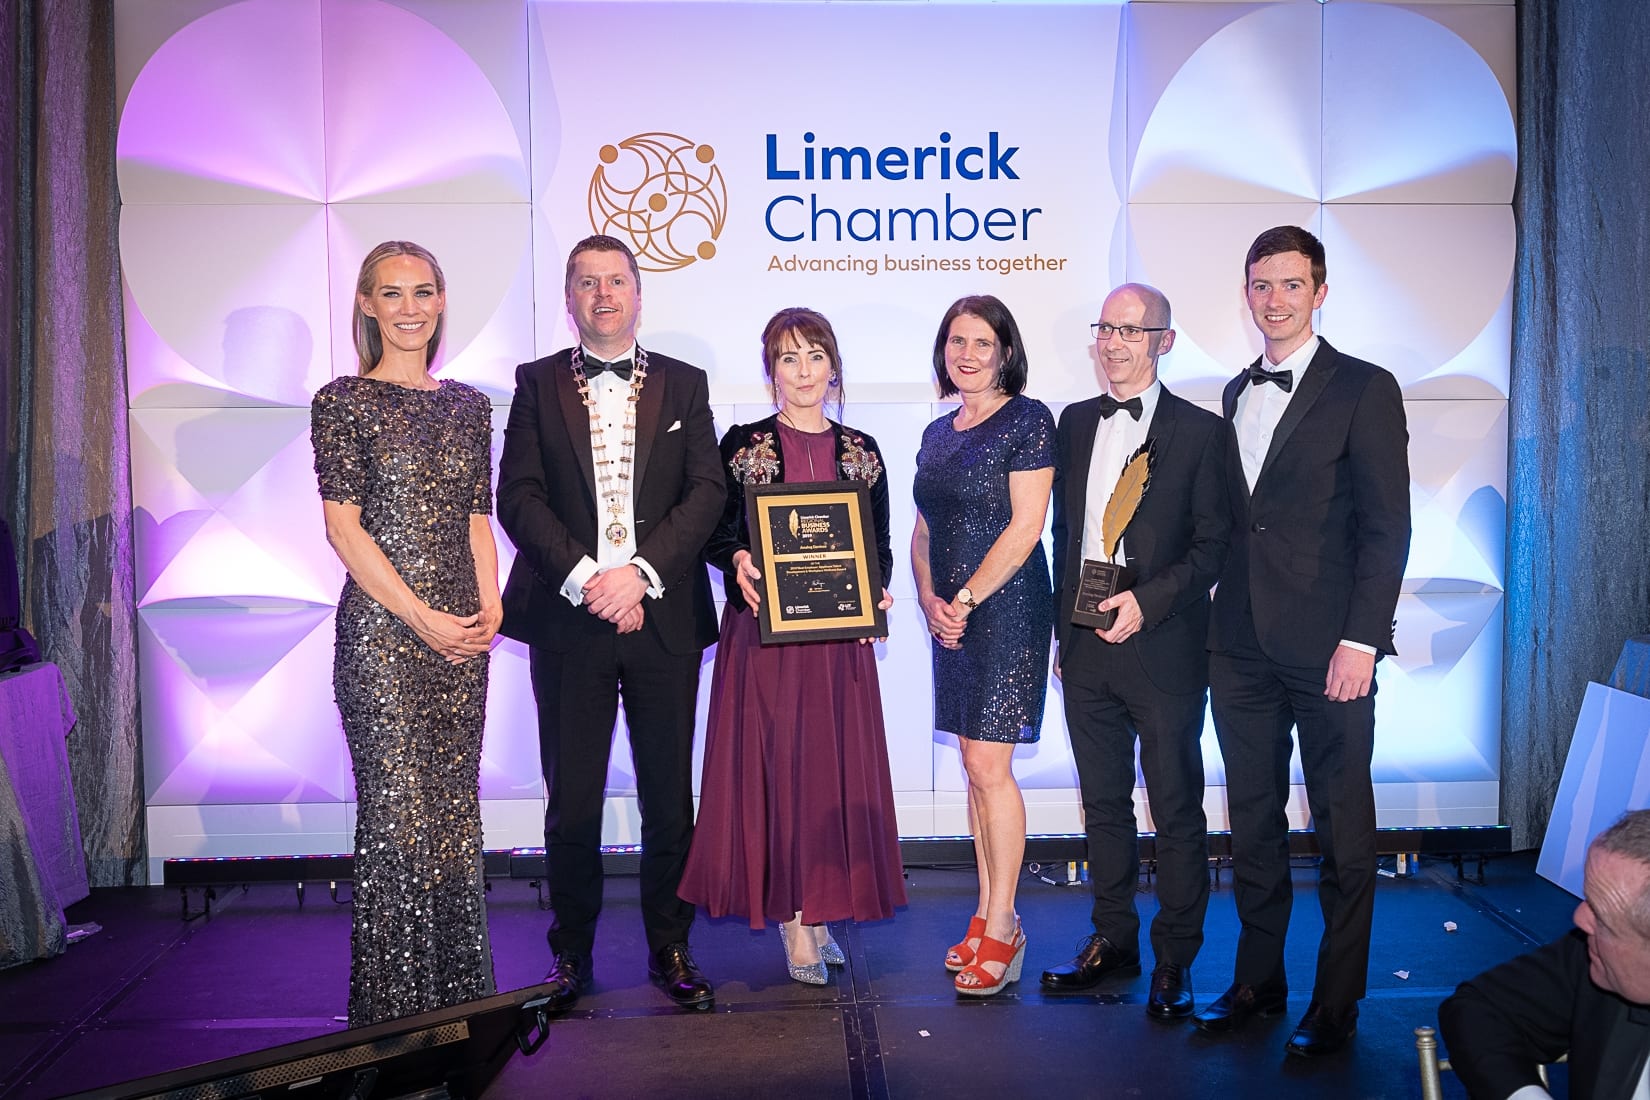 No repro fee-Limerick Chamber President’s Dinner
and Limerick Chamber Regional Business Awards 2019 which was held in the Strand Hotel on Friday 15th November /Best Employer/  - From Left to Right: Dee Ryan - CEO Limerick Chamber, Eoin Ryan - President Limerick Chamber, Fiona Keogh - Winner / Analog Devices, Anne Morris - Limerick Chamber Skillnet / Sponsor, Mike Morissery - Winner / Analog Devices, Ruairí Nealon- Winner / Analog Devices,
Photo credit Shauna Kennedy